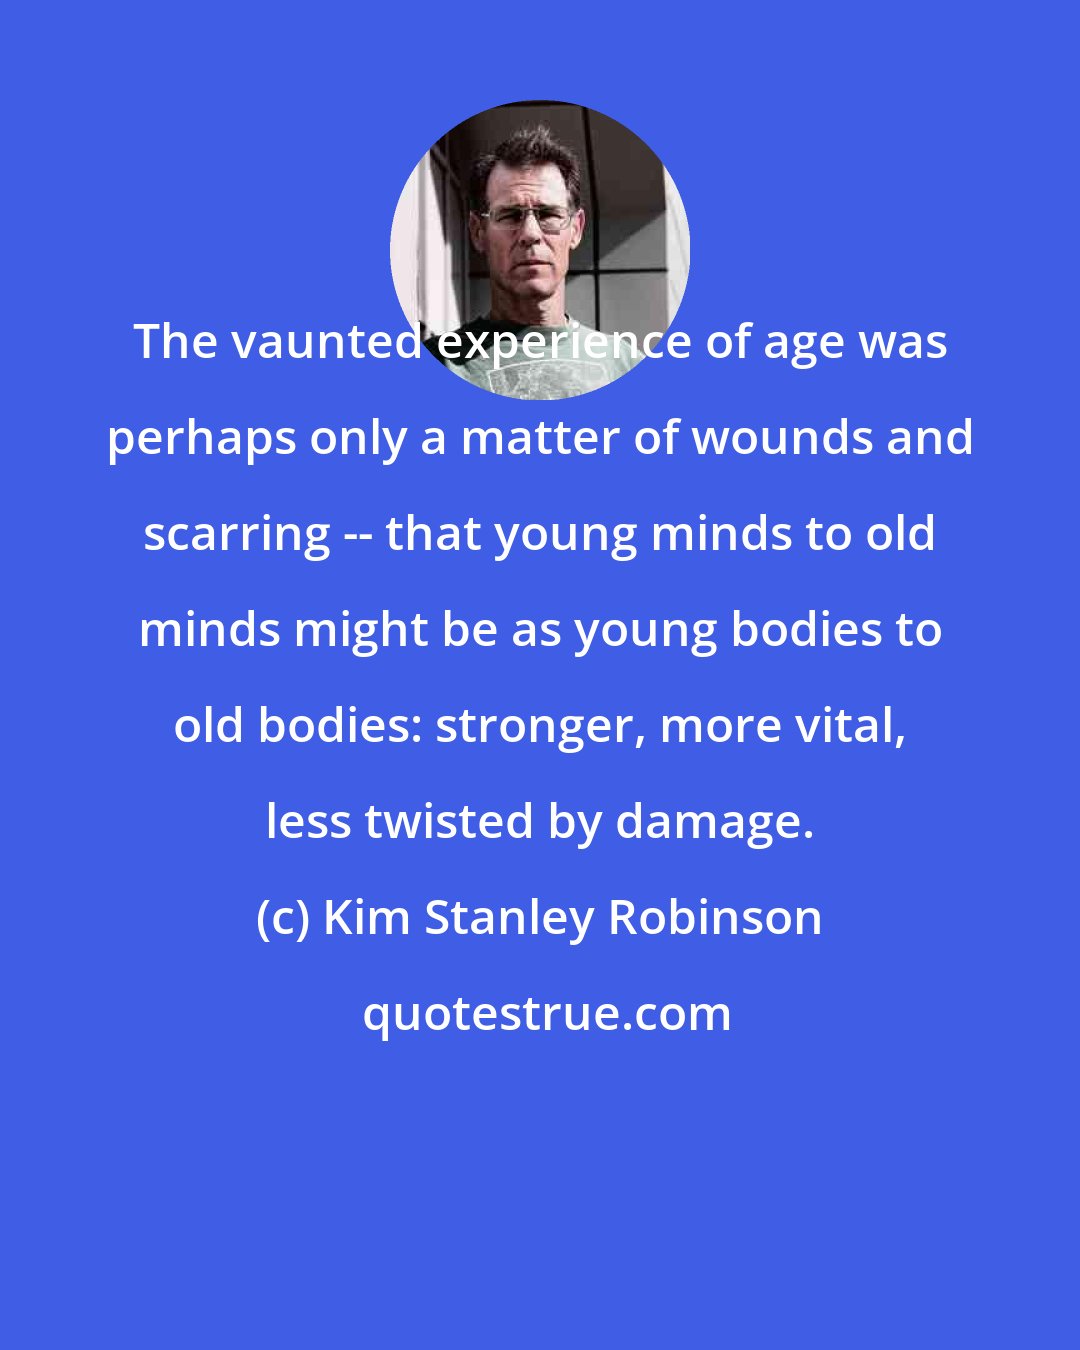 Kim Stanley Robinson: The vaunted experience of age was perhaps only a matter of wounds and scarring -- that young minds to old minds might be as young bodies to old bodies: stronger, more vital, less twisted by damage.